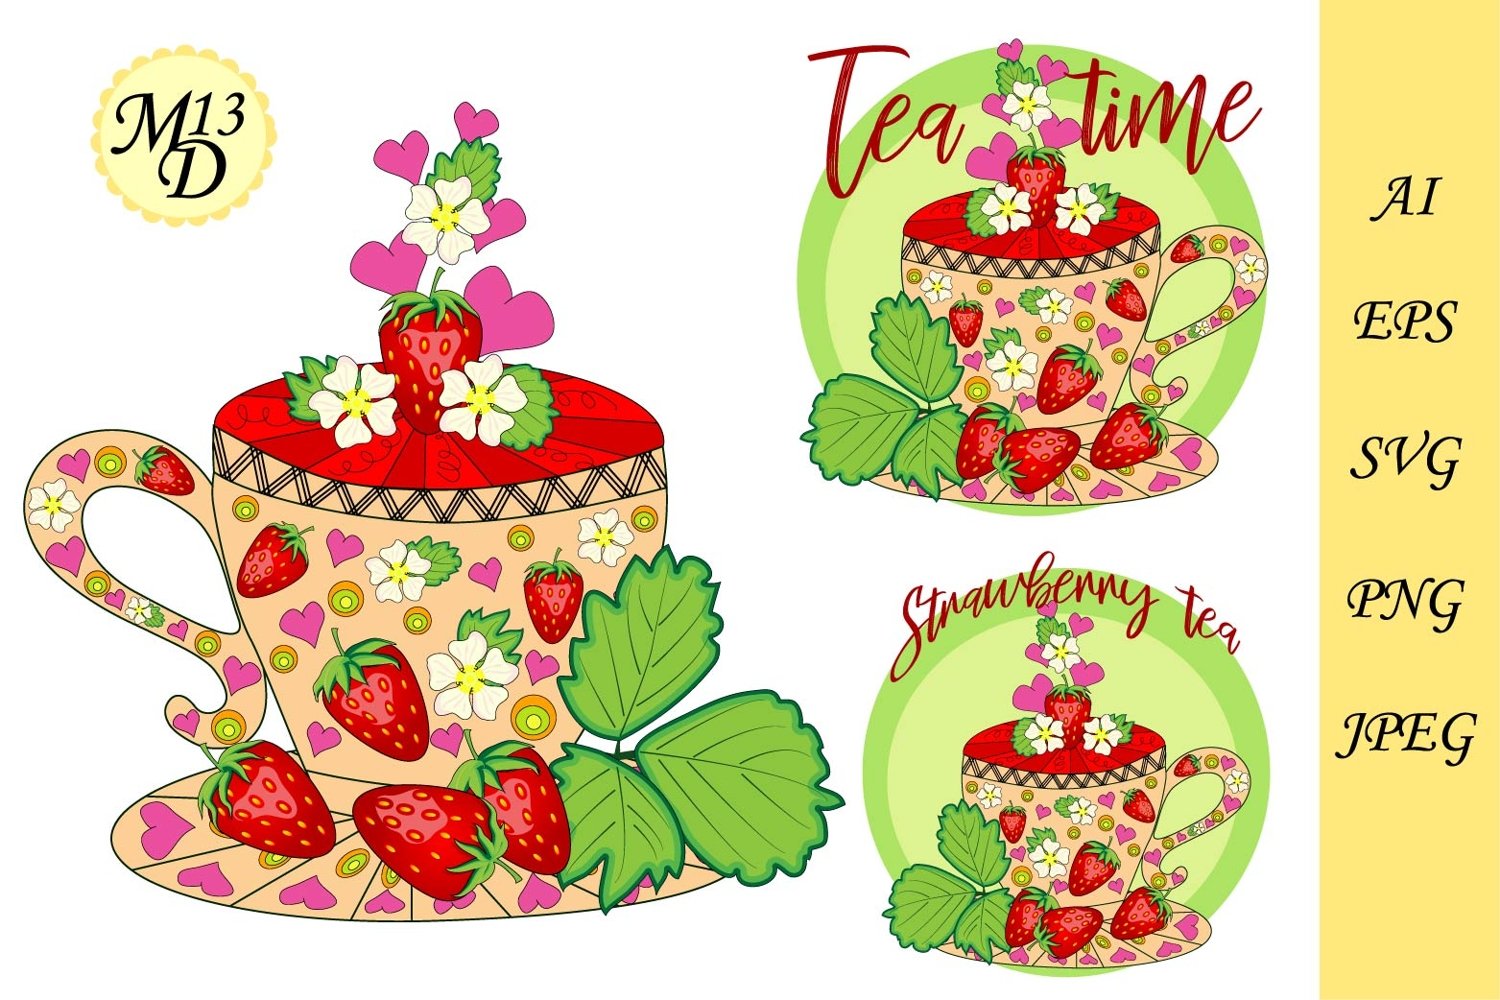 Cover image of Strawberry tea.